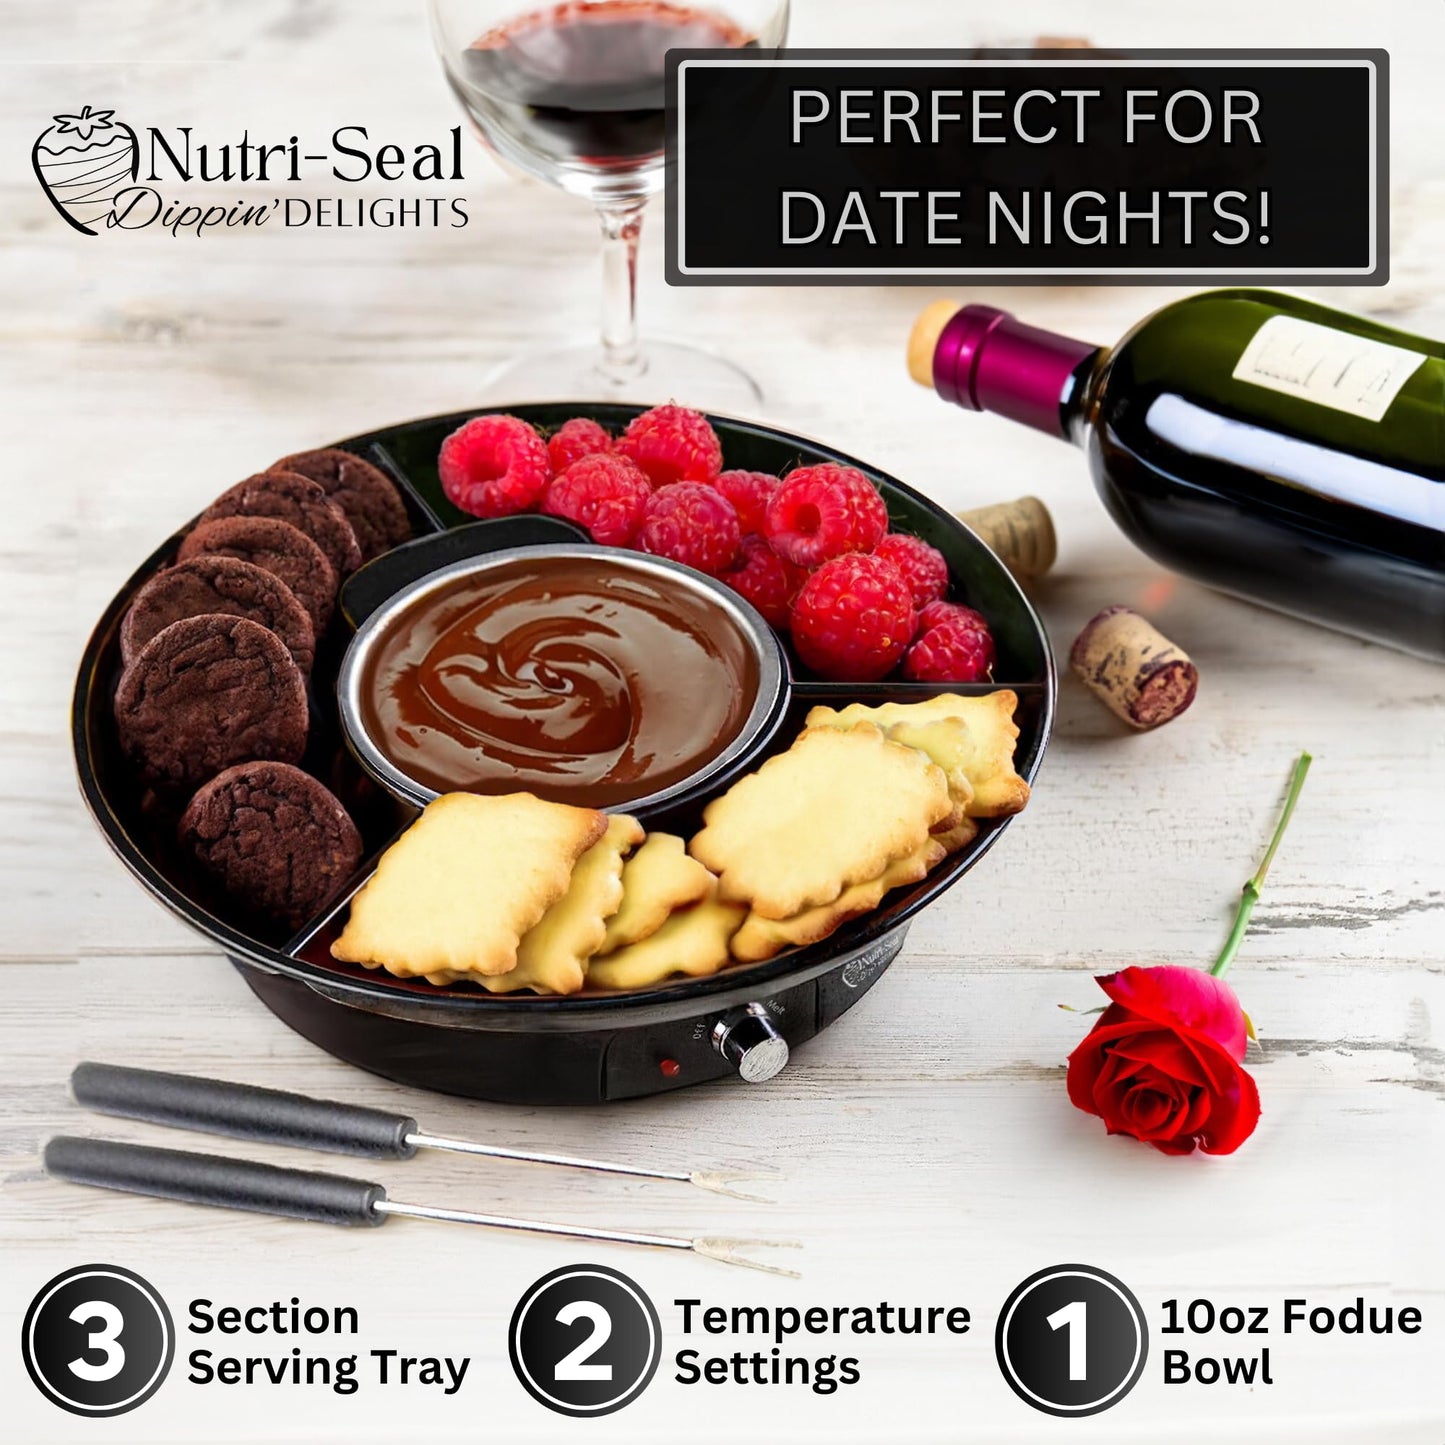 Dippin' Delights Premium Fondue Pot Electric Set - Perfect Chocolate Fondue Set for Parties, Gifting, and Date Night -Easy to Use & Clean - Detachable Tray w/4 Roasting Forks - Electric Fondue Pot Set